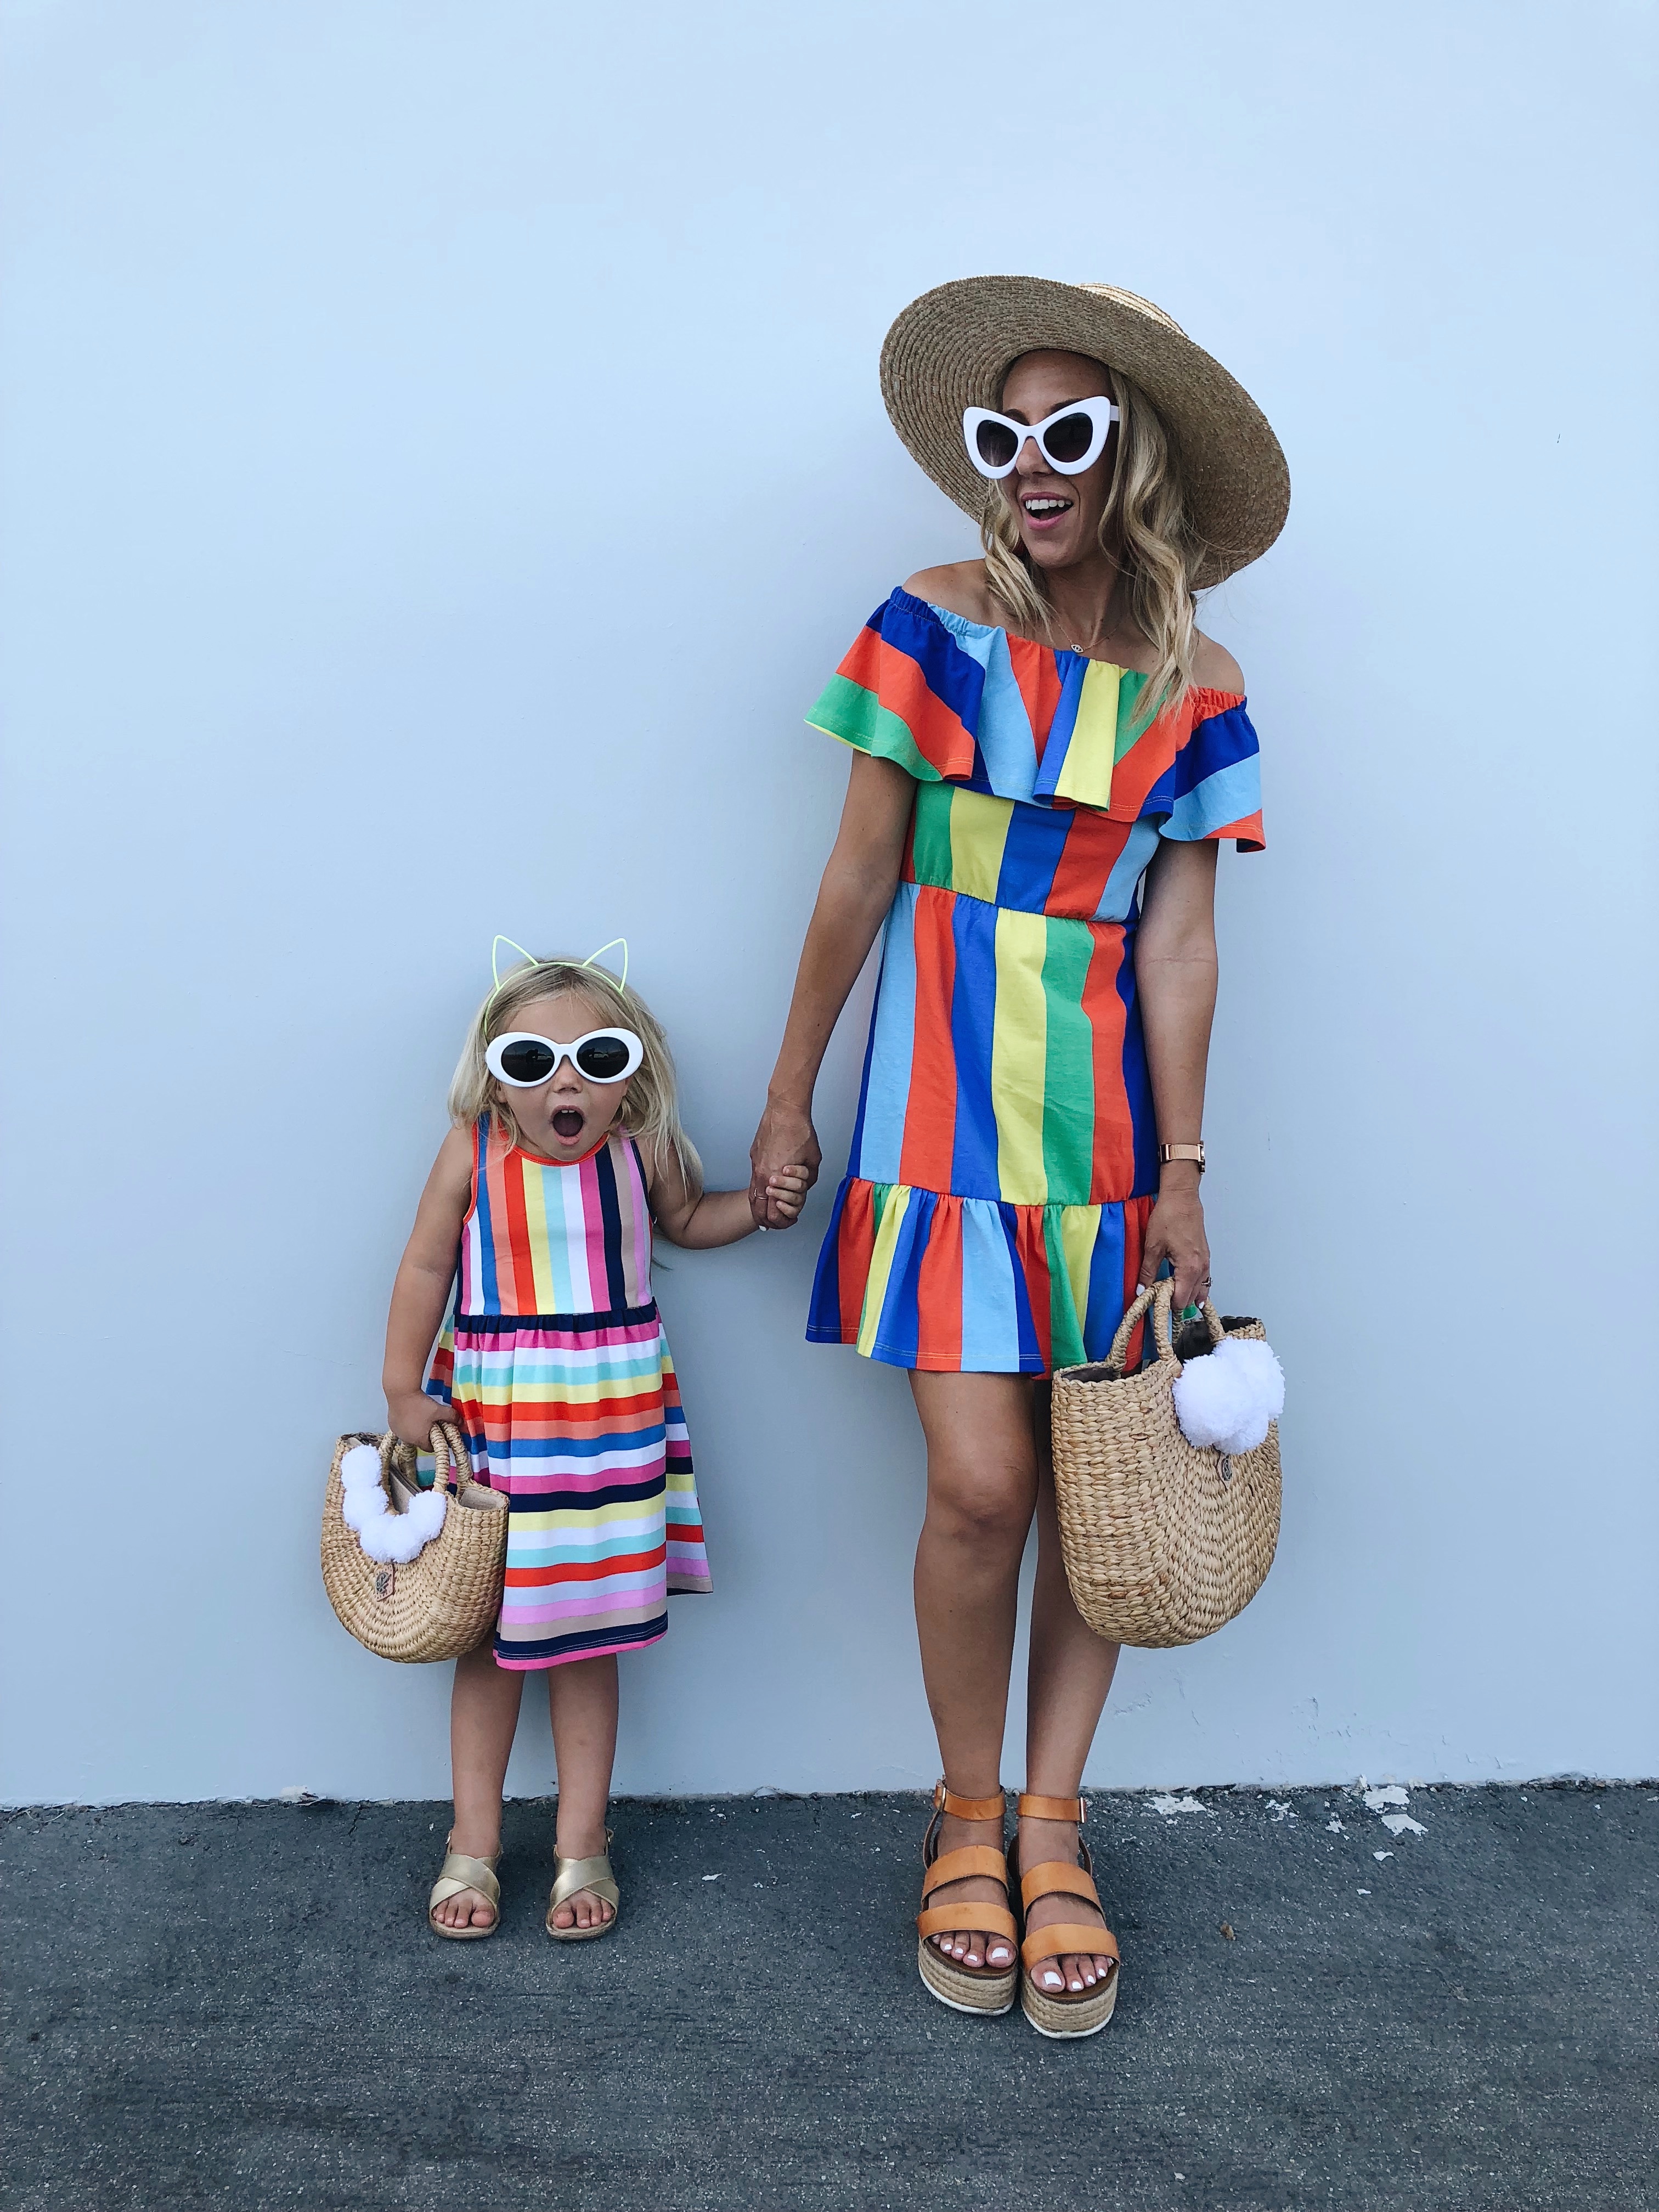 MOMMY & ME IN STRIPES- Jaclyn De Leon Style + MOM STYLE + MATCHING OUTFITS + COLORFUL STRIPES + SUMMER STYLE + KID STYLE + MOMMY LIFE + ASOS + H&M KIDS + CASUAL DRESSES + STREET STYLE + STRIPE TREND + #MOMLIFE #MOMMYANDME #MATCHING